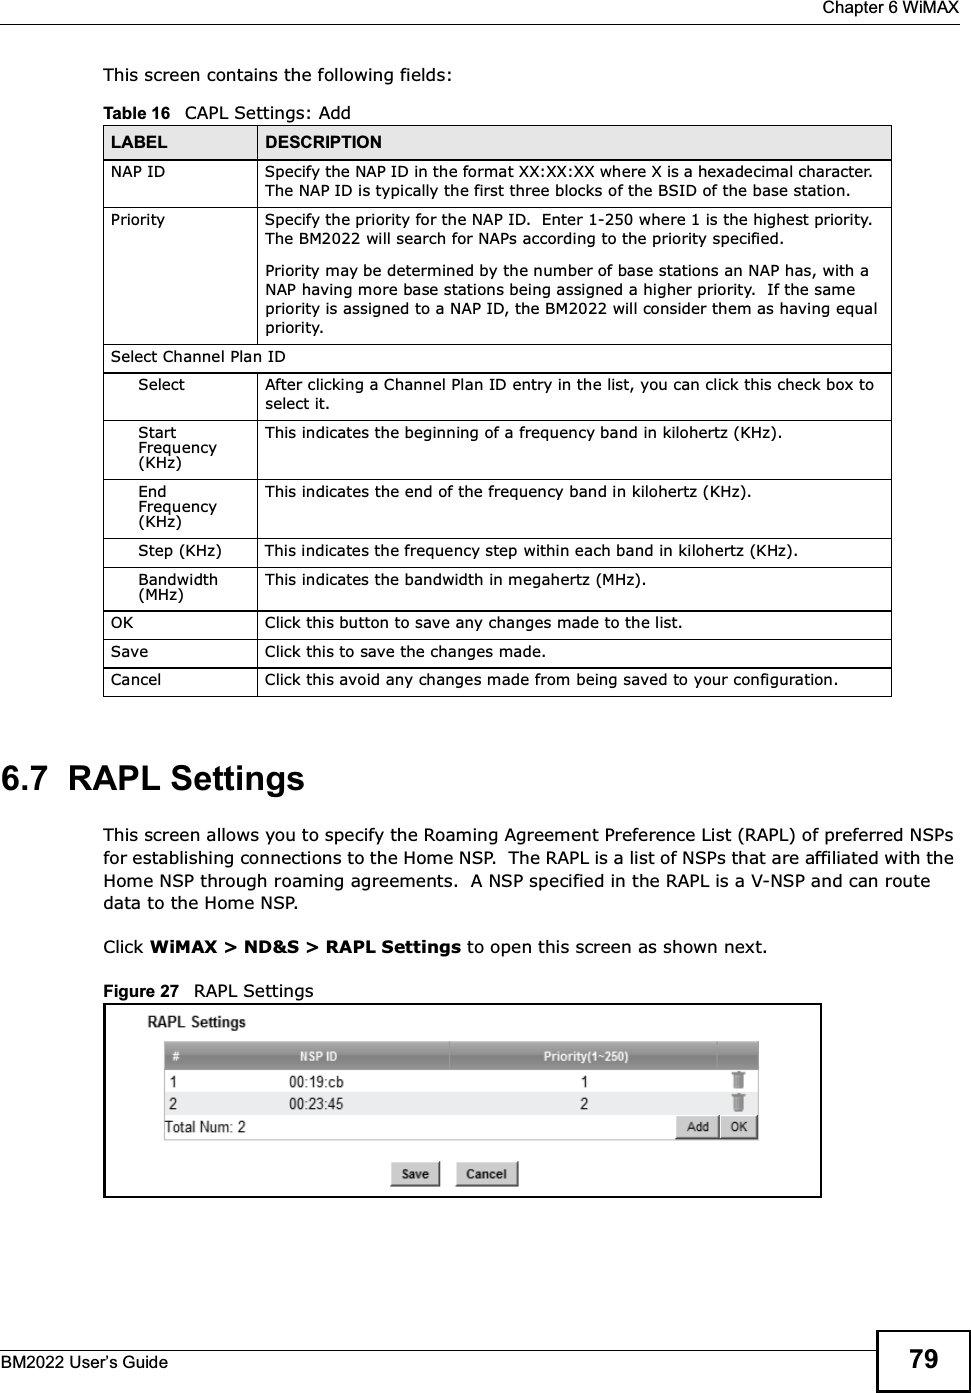  Chapter 6 WiMAXBM2022 Users Guide 79This screen contains the following fields:6.7  RAPL SettingsThis screen allows you to specify the Roaming Agreement Preference List (RAPL) of preferred NSPs for establishing connections to the Home NSP.  The RAPL is a list of NSPs that are affiliated with the Home NSP through roaming agreements.  A NSP specified in the RAPL is a V-NSP and can route data to the Home NSP.Click WiMAX &gt; ND&amp;S &gt; RAPL Settings to open this screen as shown next.Figure 27   RAPL SettingsTable 16   CAPL Settings: AddLABEL DESCRIPTIONNAP ID Specify the NAP ID in the format XX:XX:XX where X is a hexadecimal character.  The NAP ID is typically the first three blocks of the BSID of the base station.Priority Specify the priority for the NAP ID.  Enter 1-250 where 1 is the highest priority.  The BM2022 will search for NAPs according to the priority specified.Priority may be determined by the number of base stations an NAP has, with a NAP having more base stations being assigned a higher priority.  If the same priority is assigned to a NAP ID, the BM2022 will consider them as having equal priority.Select Channel Plan IDSelect After clicking a Channel Plan ID entry in the list, you can click this check box to select it.Start Frequency (KHz)This indicates the beginning of a frequency band in kilohertz (KHz).End Frequency (KHz)This indicates the end of the frequency band in kilohertz (KHz).Step (KHz) This indicates the frequency step within each band in kilohertz (KHz).Bandwidth (MHz)This indicates the bandwidth in megahertz (MHz).OK Click this button to save any changes made to the list.Save Click this to save the changes made.Cancel Click this avoid any changes made from being saved to your configuration.